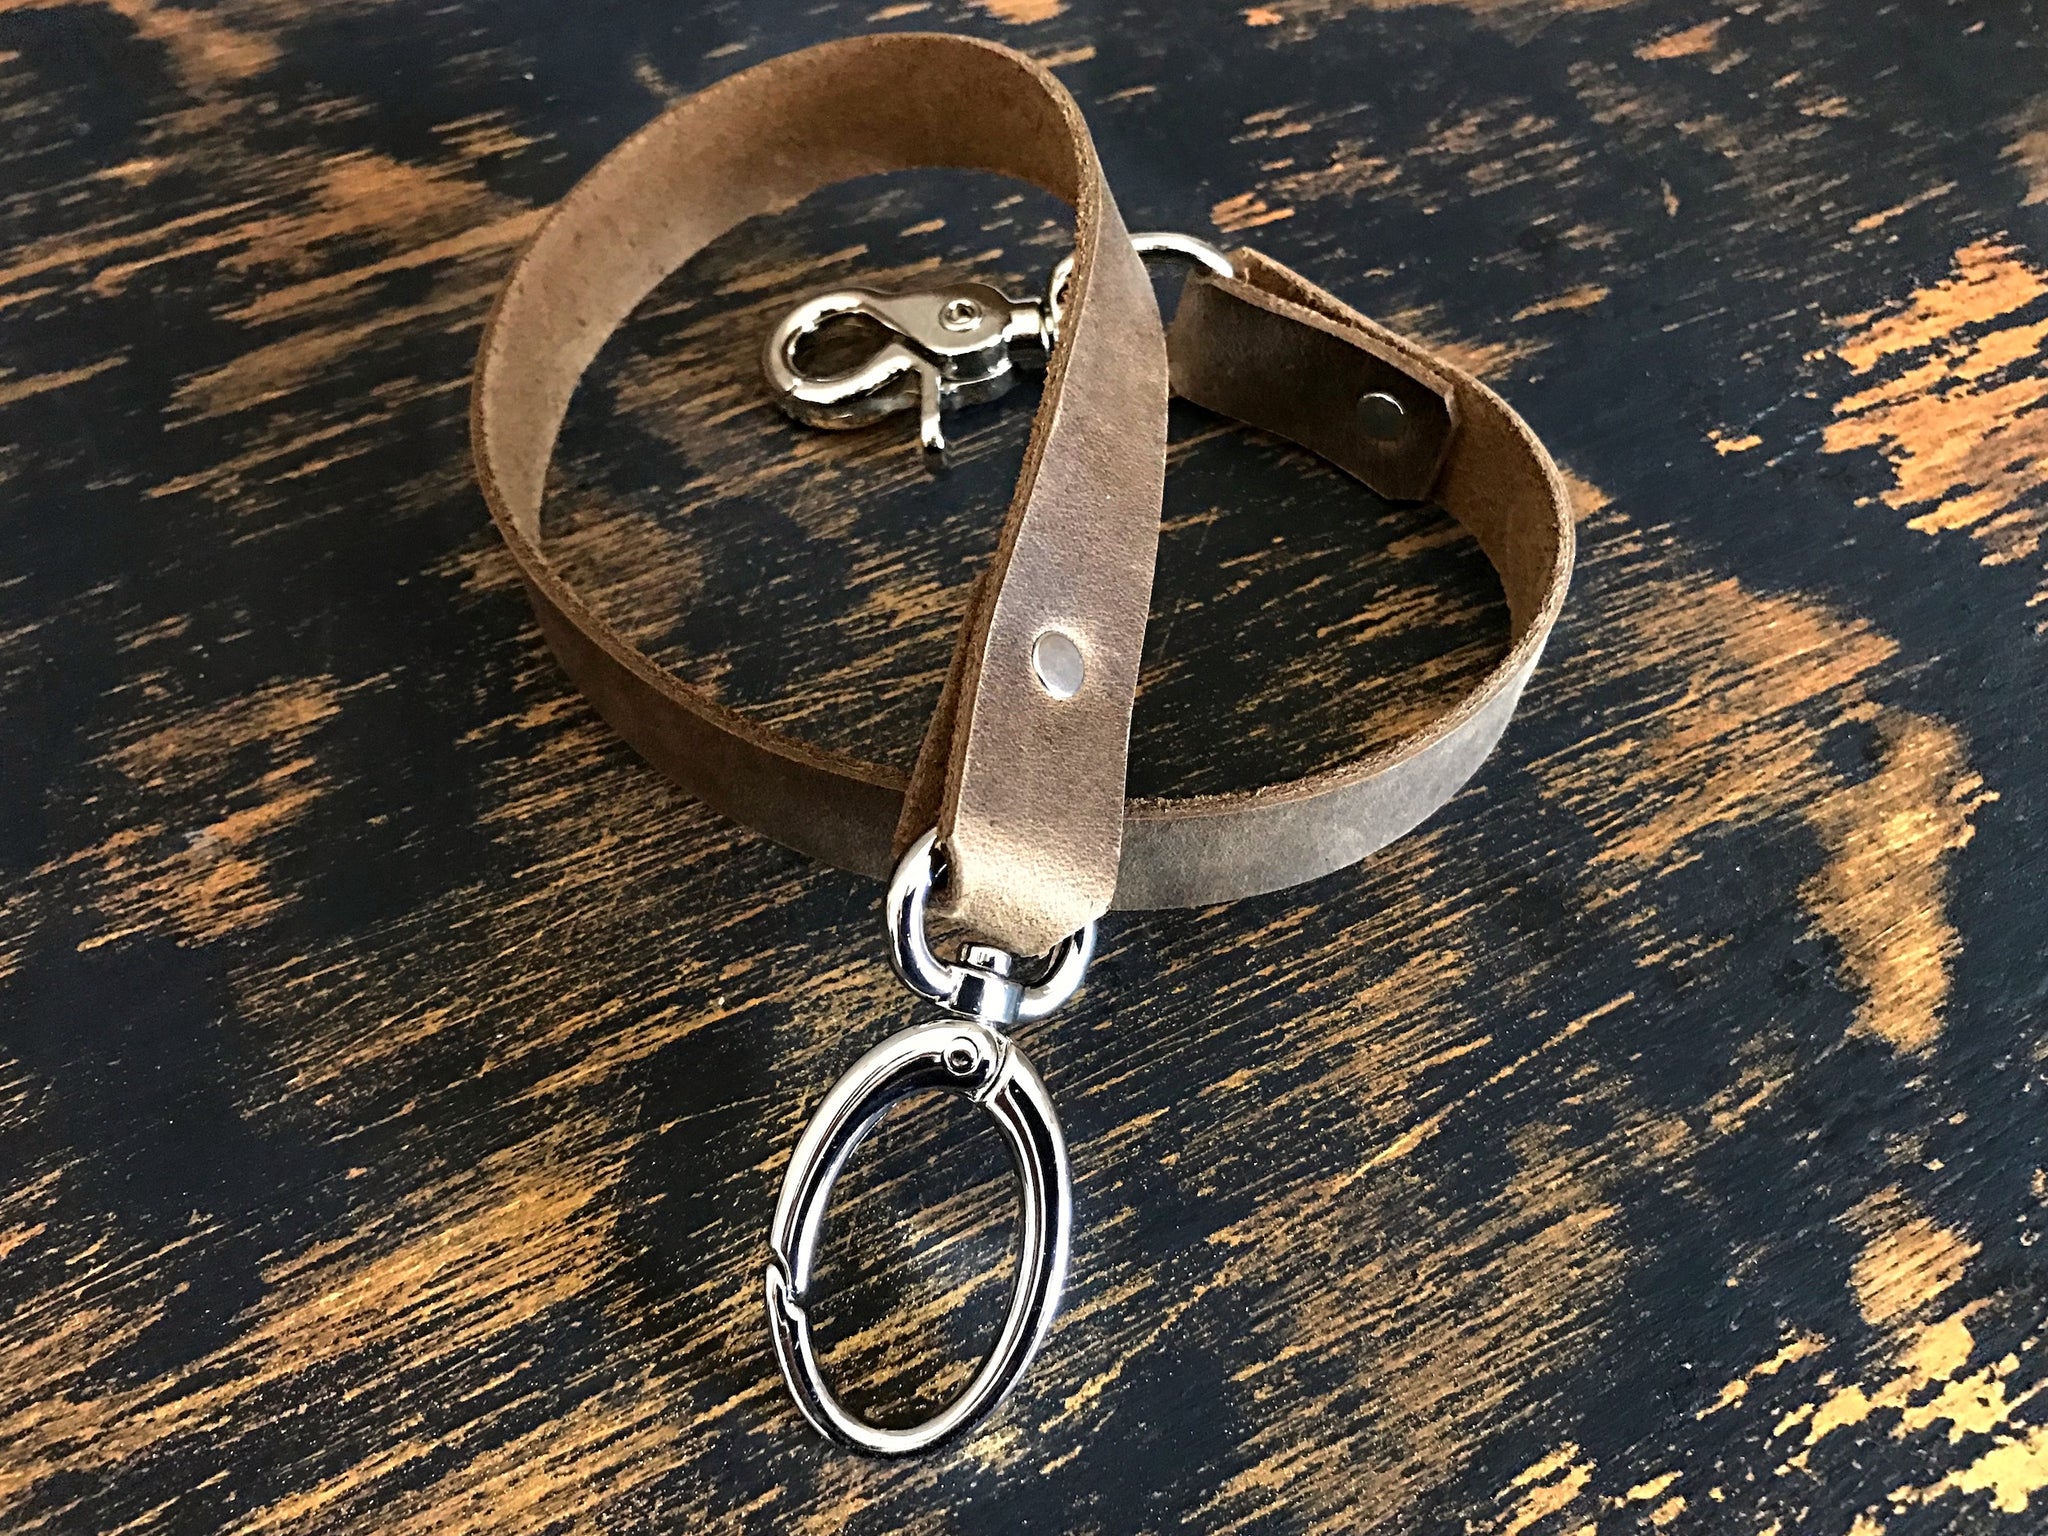 custom leather strap wallet chain wallet leash by san filippo leather